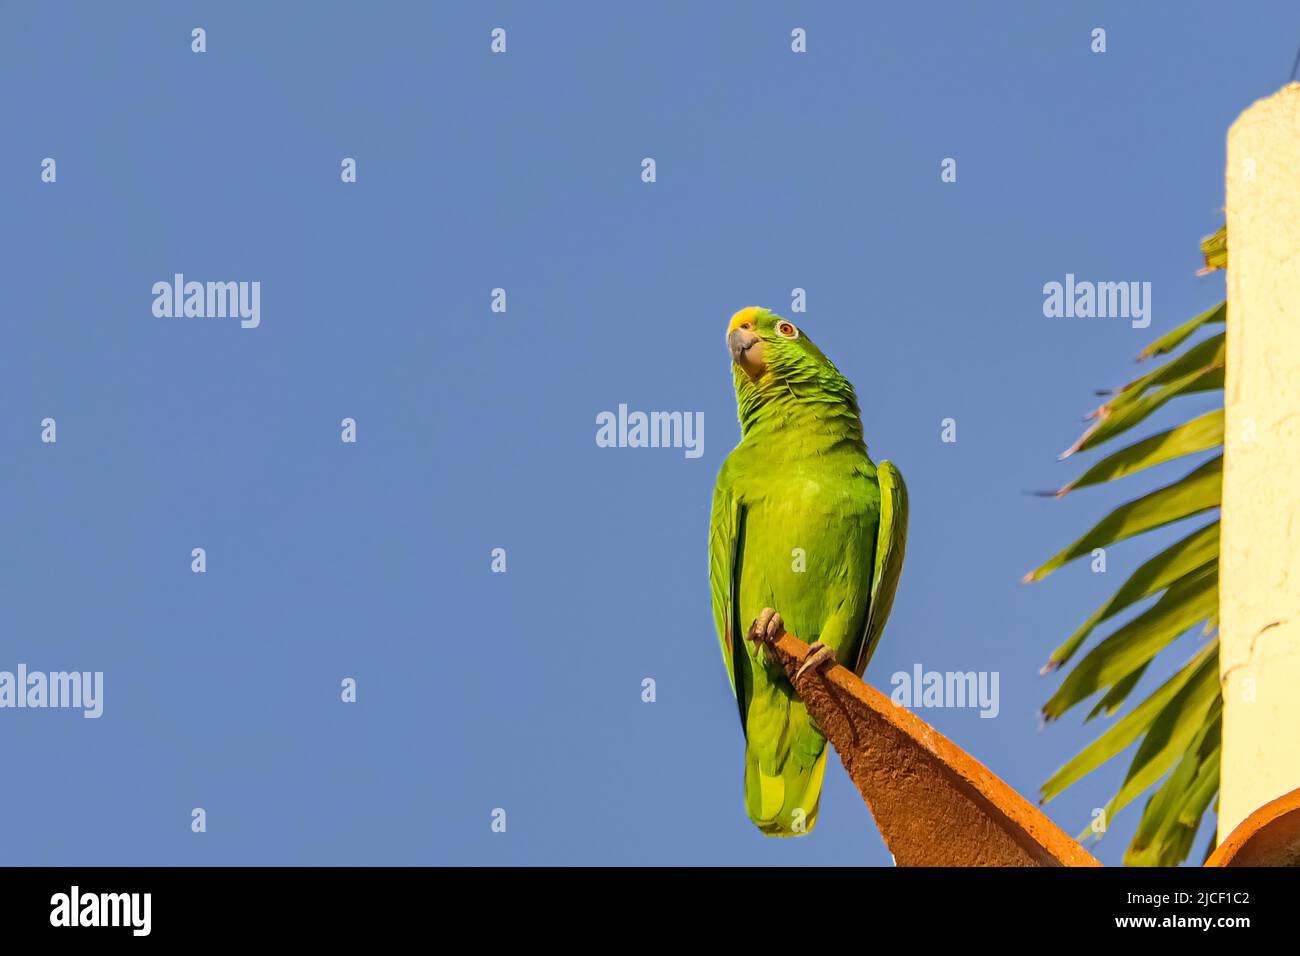 Yellow-crowned parrot sitting on a red roof tile against deep blue sky Stock Photo